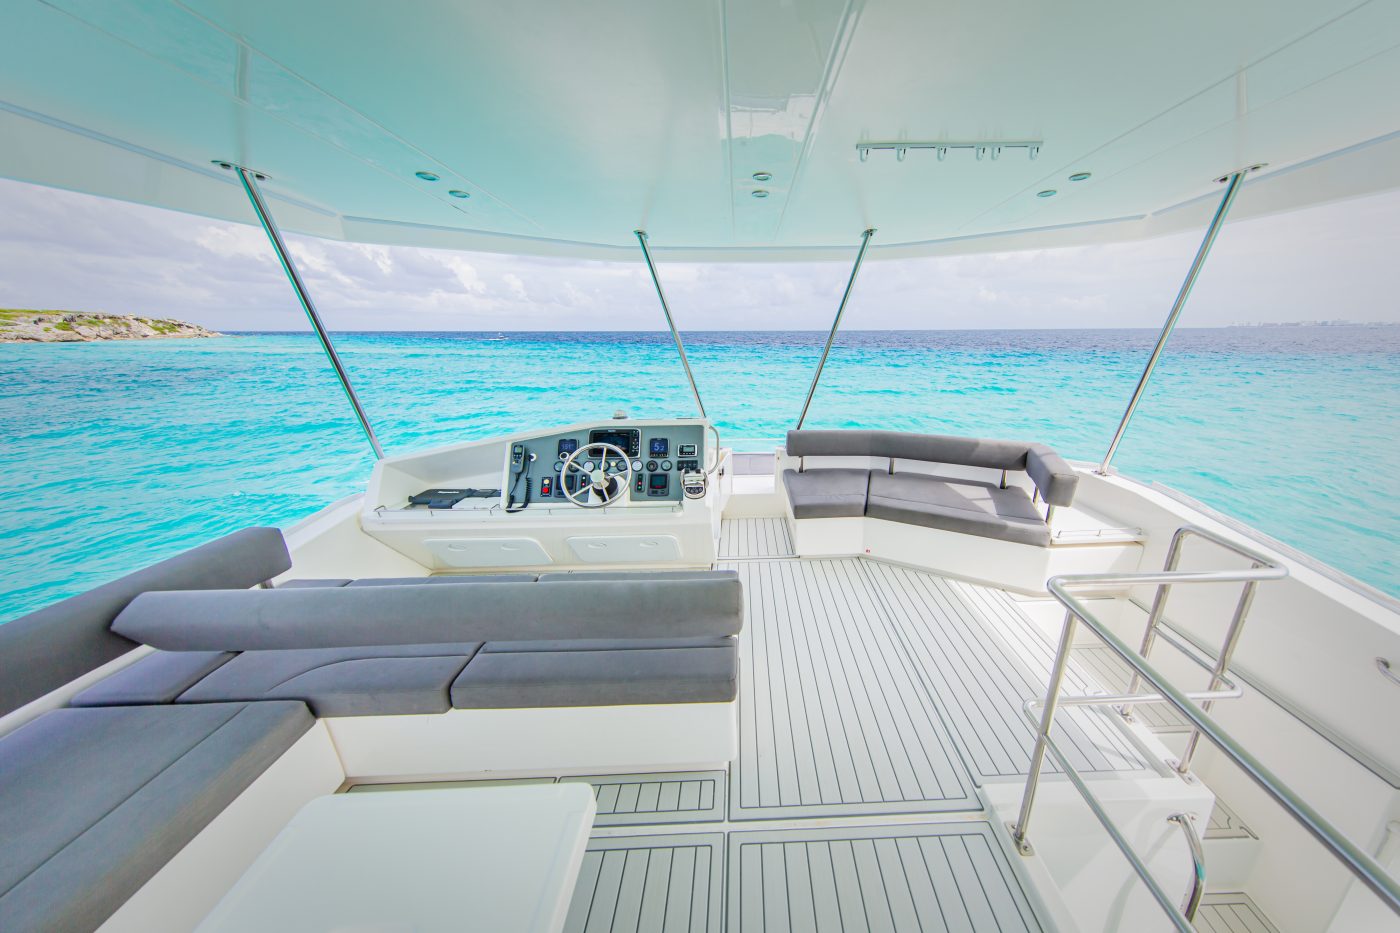 Leopard Catamaran for Luxury Yacht Charters from Cancun sofas lounge